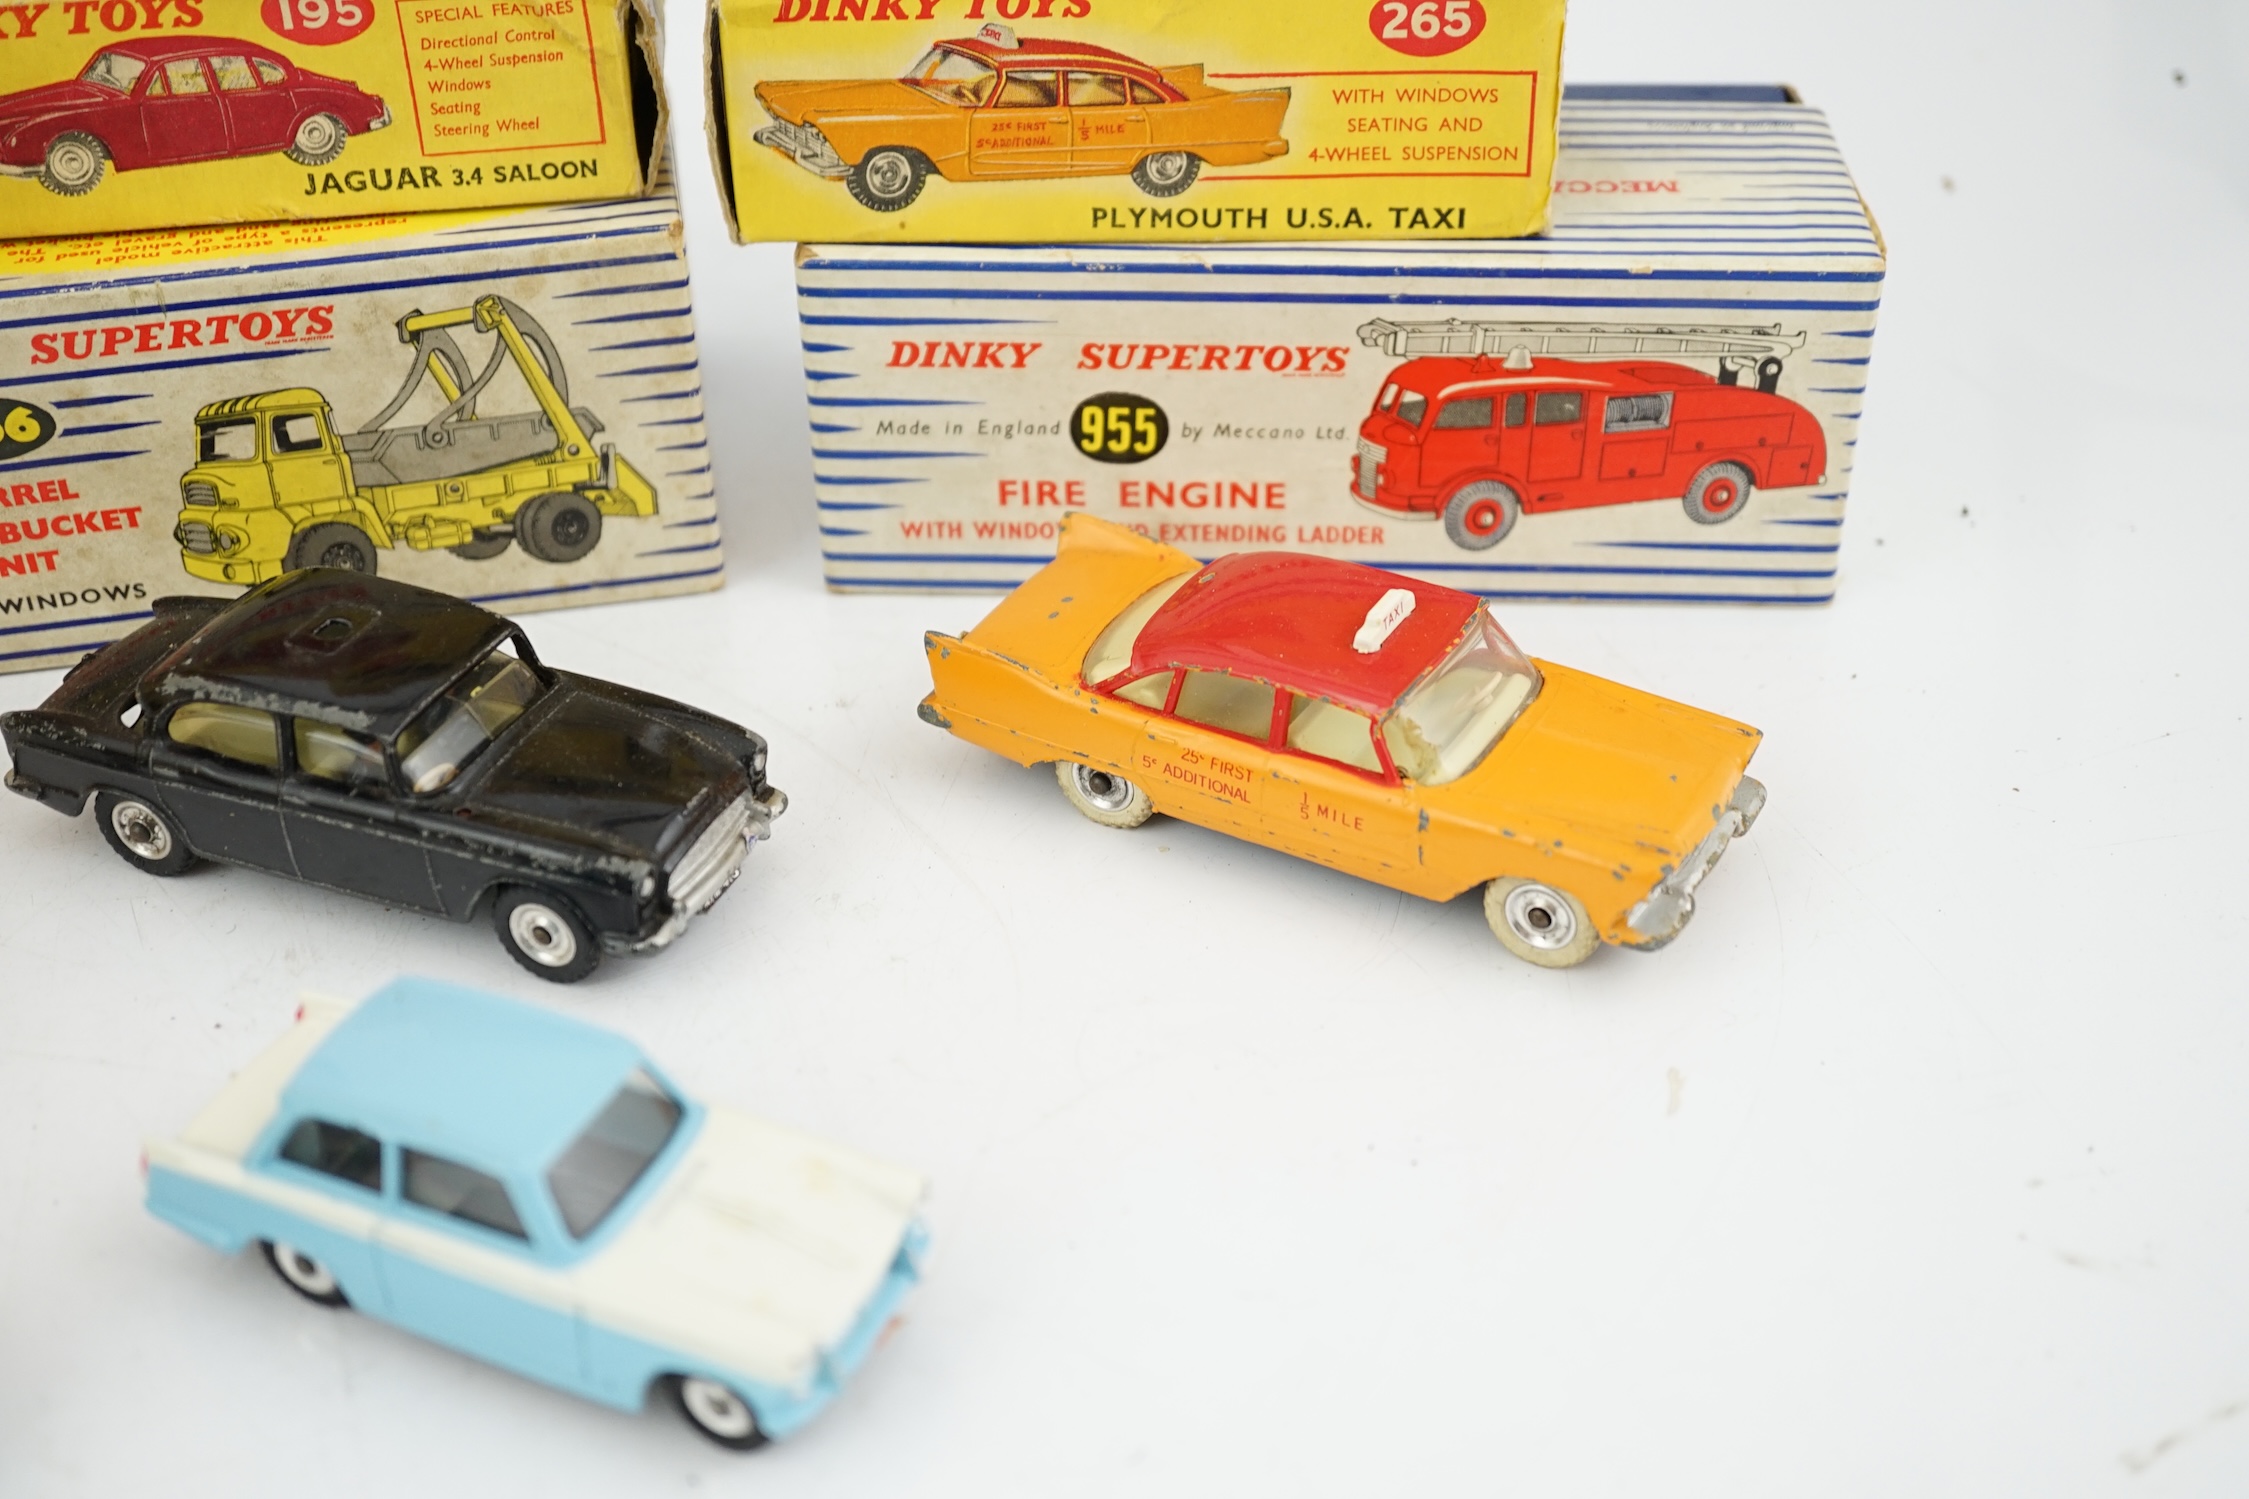 Eleven boxed Dinky Toys; a Triumph Herald (189), a Plymouth U.S.A. Taxi (265), a Chevrolet ‘El - Image 6 of 8